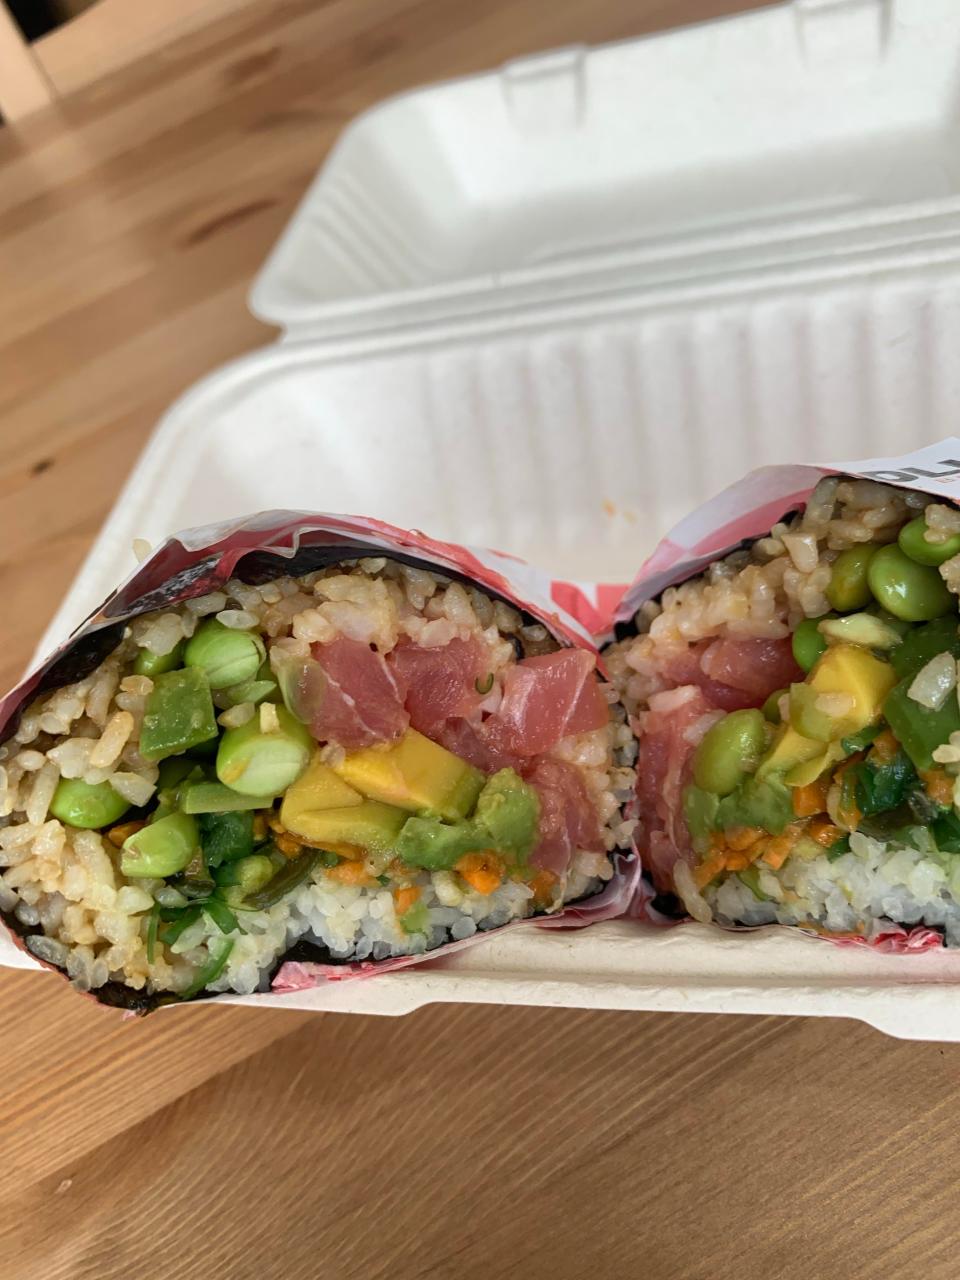 A build-your-own sushi burrito is made with rice, spicy tuna, carrot, edamame, avocado and seaweed, all wrapped in seaweed. Toppings are tamari, signature poke sauce and tempura flakes.